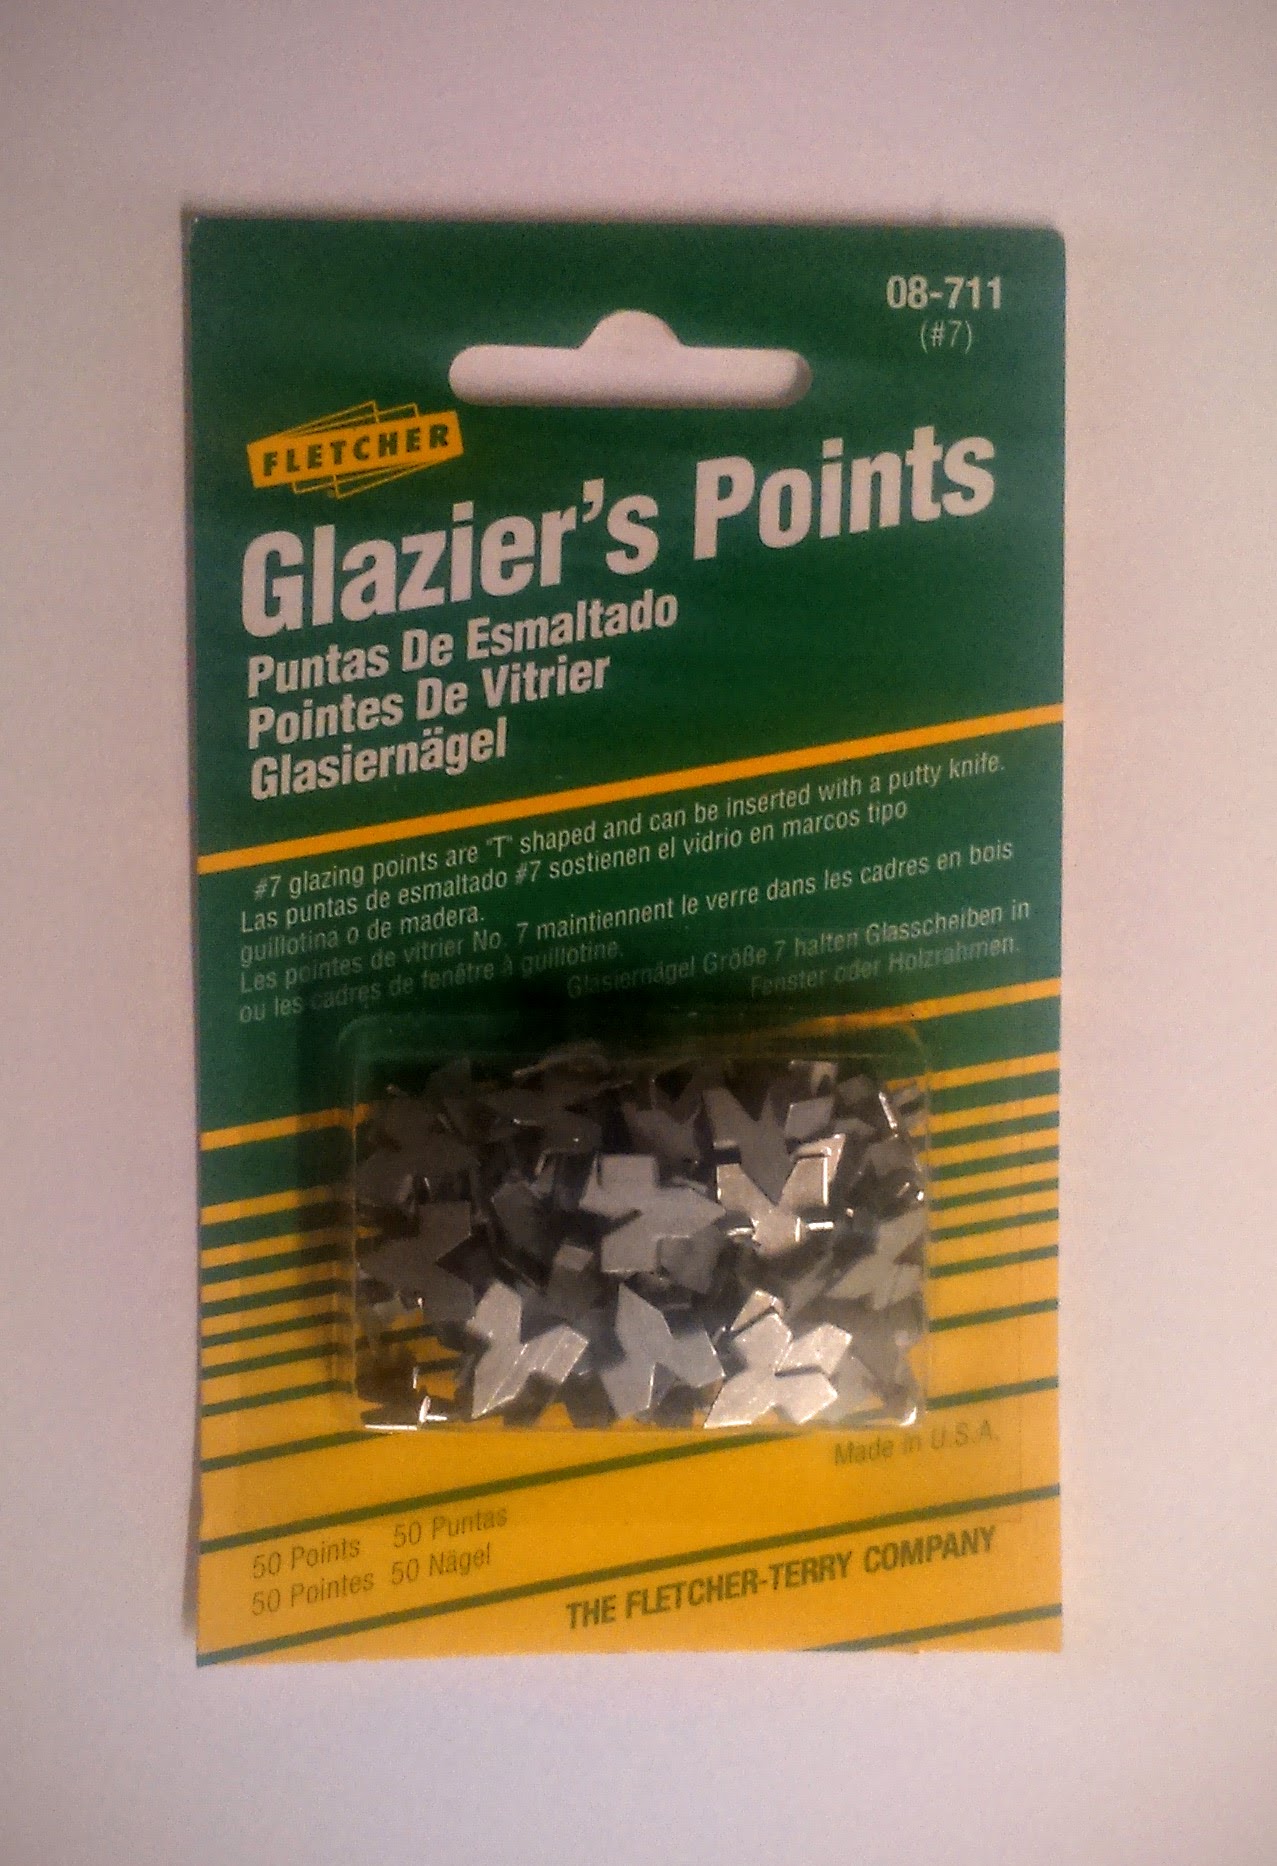 Glazier Push Points, DIY Picture Framing